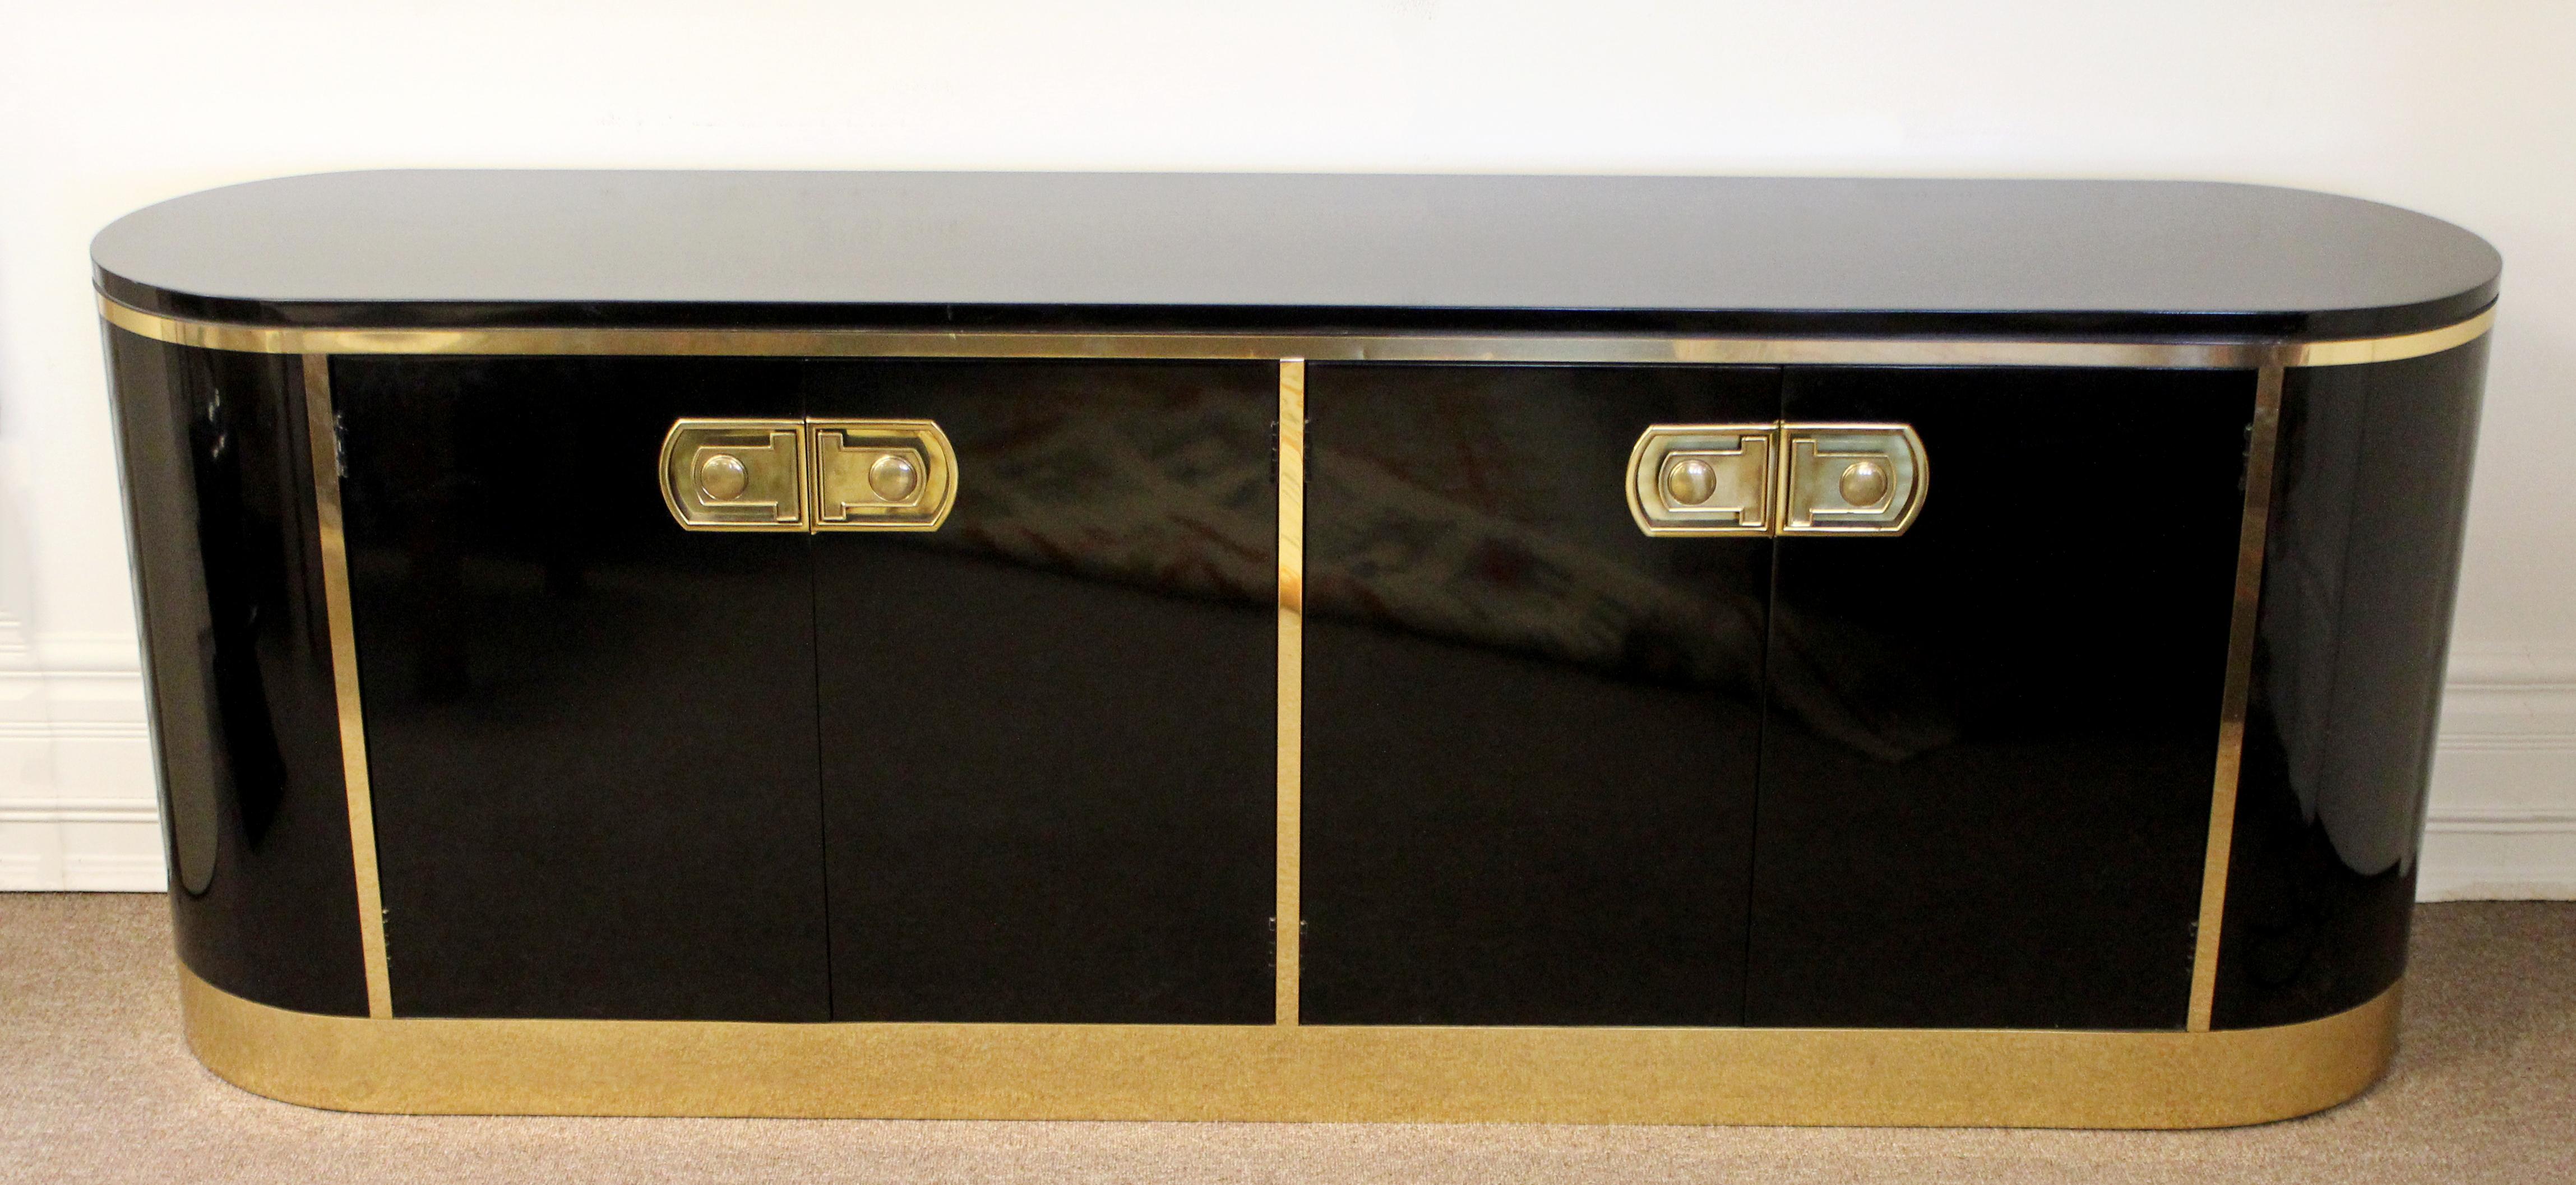 American Mid-Century Modern Mastercraft Black Lacquer and Brass Console Credenza 1970s